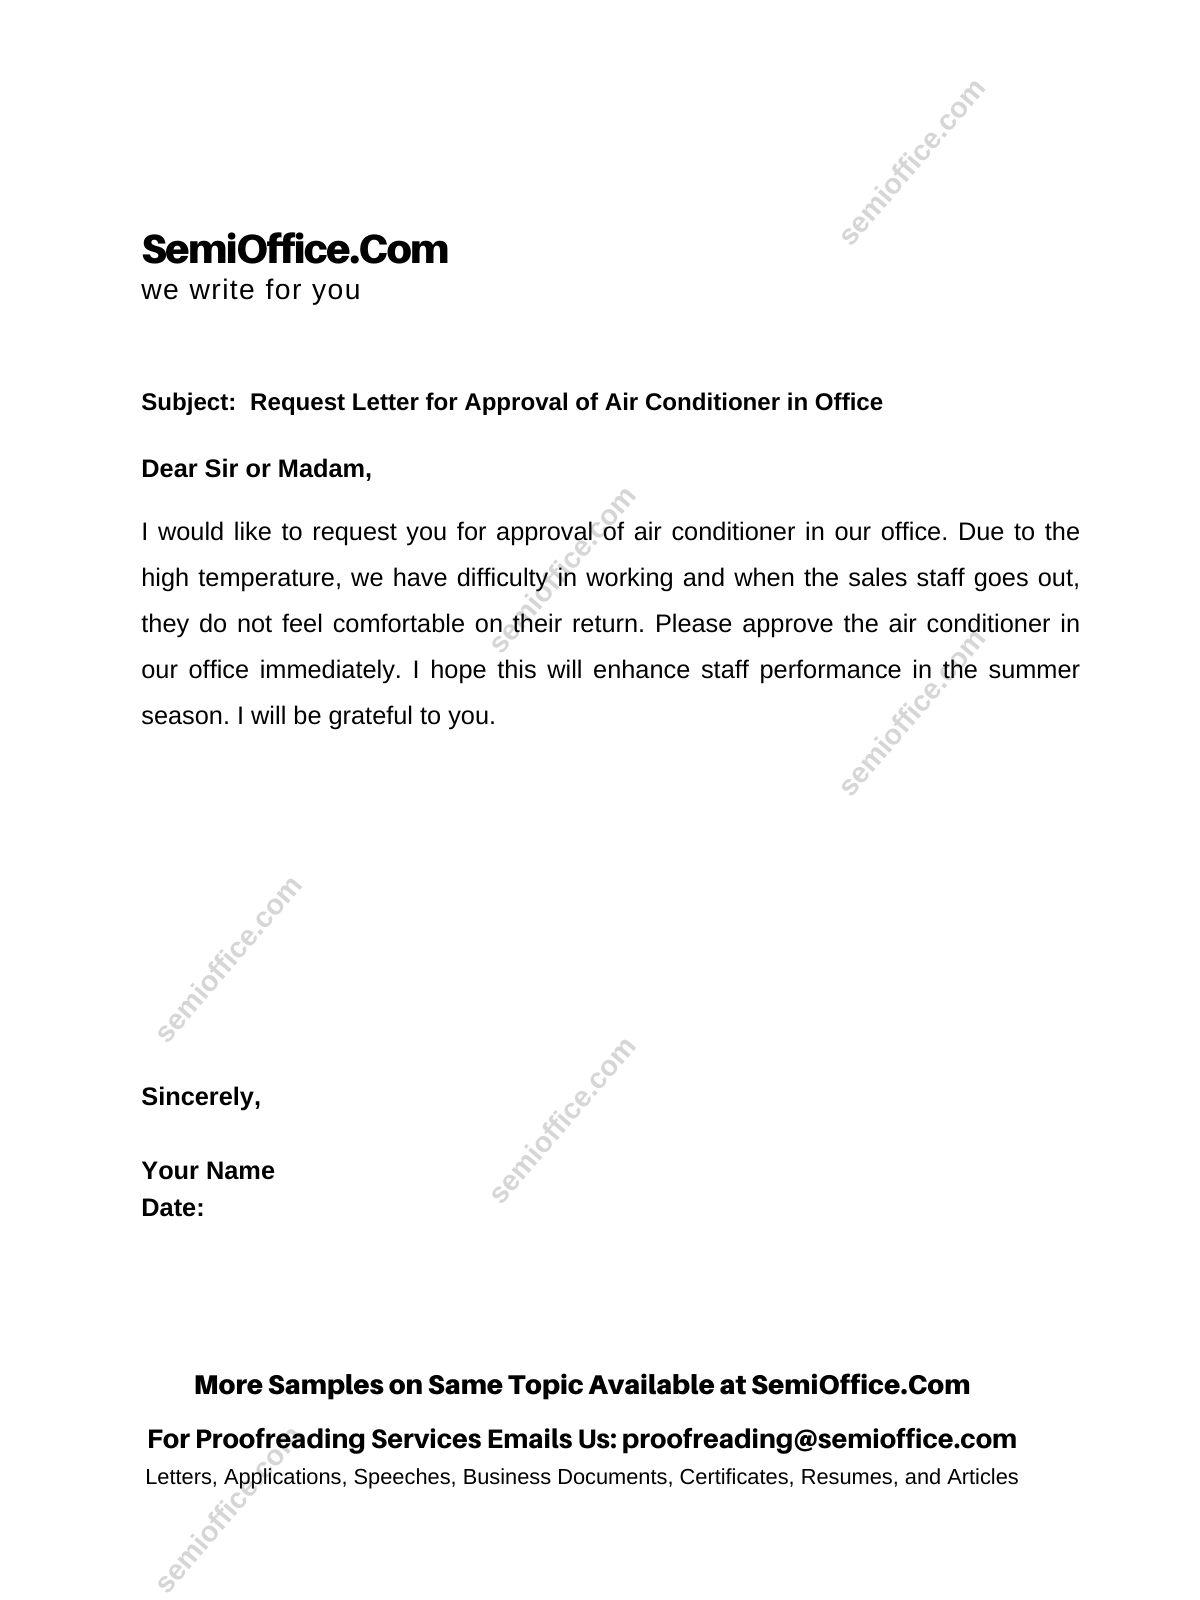 request-letter-for-installation-of-air-conditioner-in-office